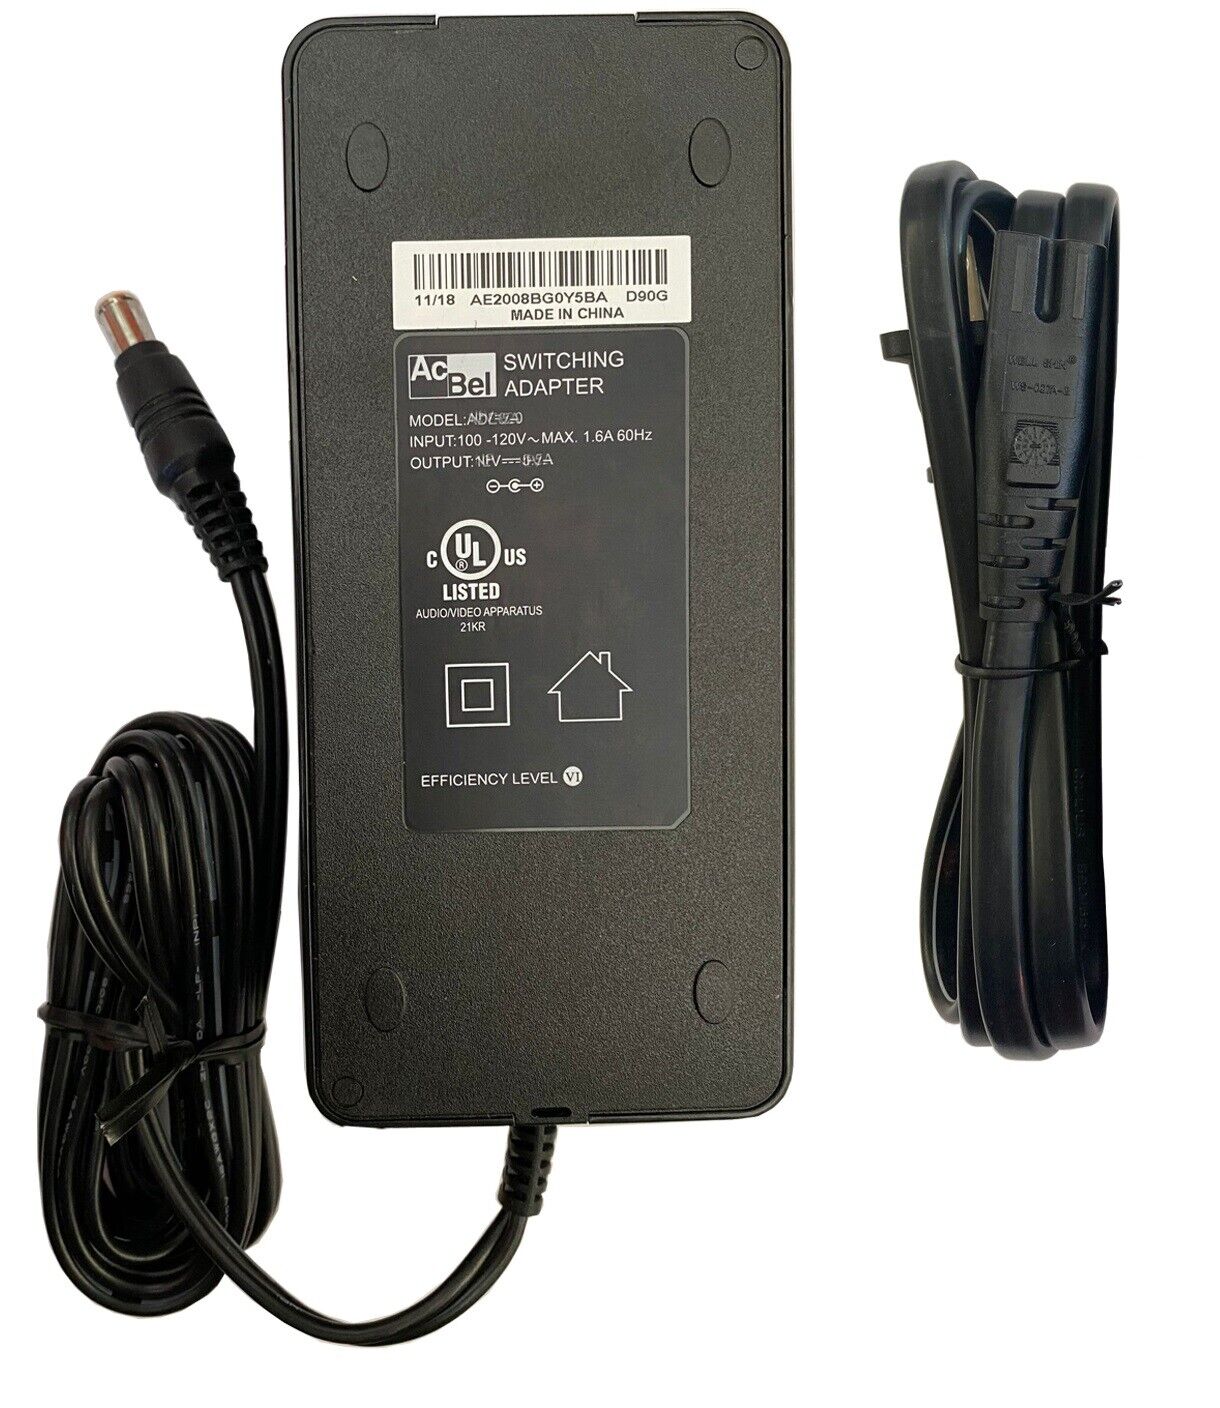 UL 12V AC Adapter For Gateway FPD1810 18" LCD Monitor Power Supply Charger PSU Type: AC/DC Adapter Features: Powered